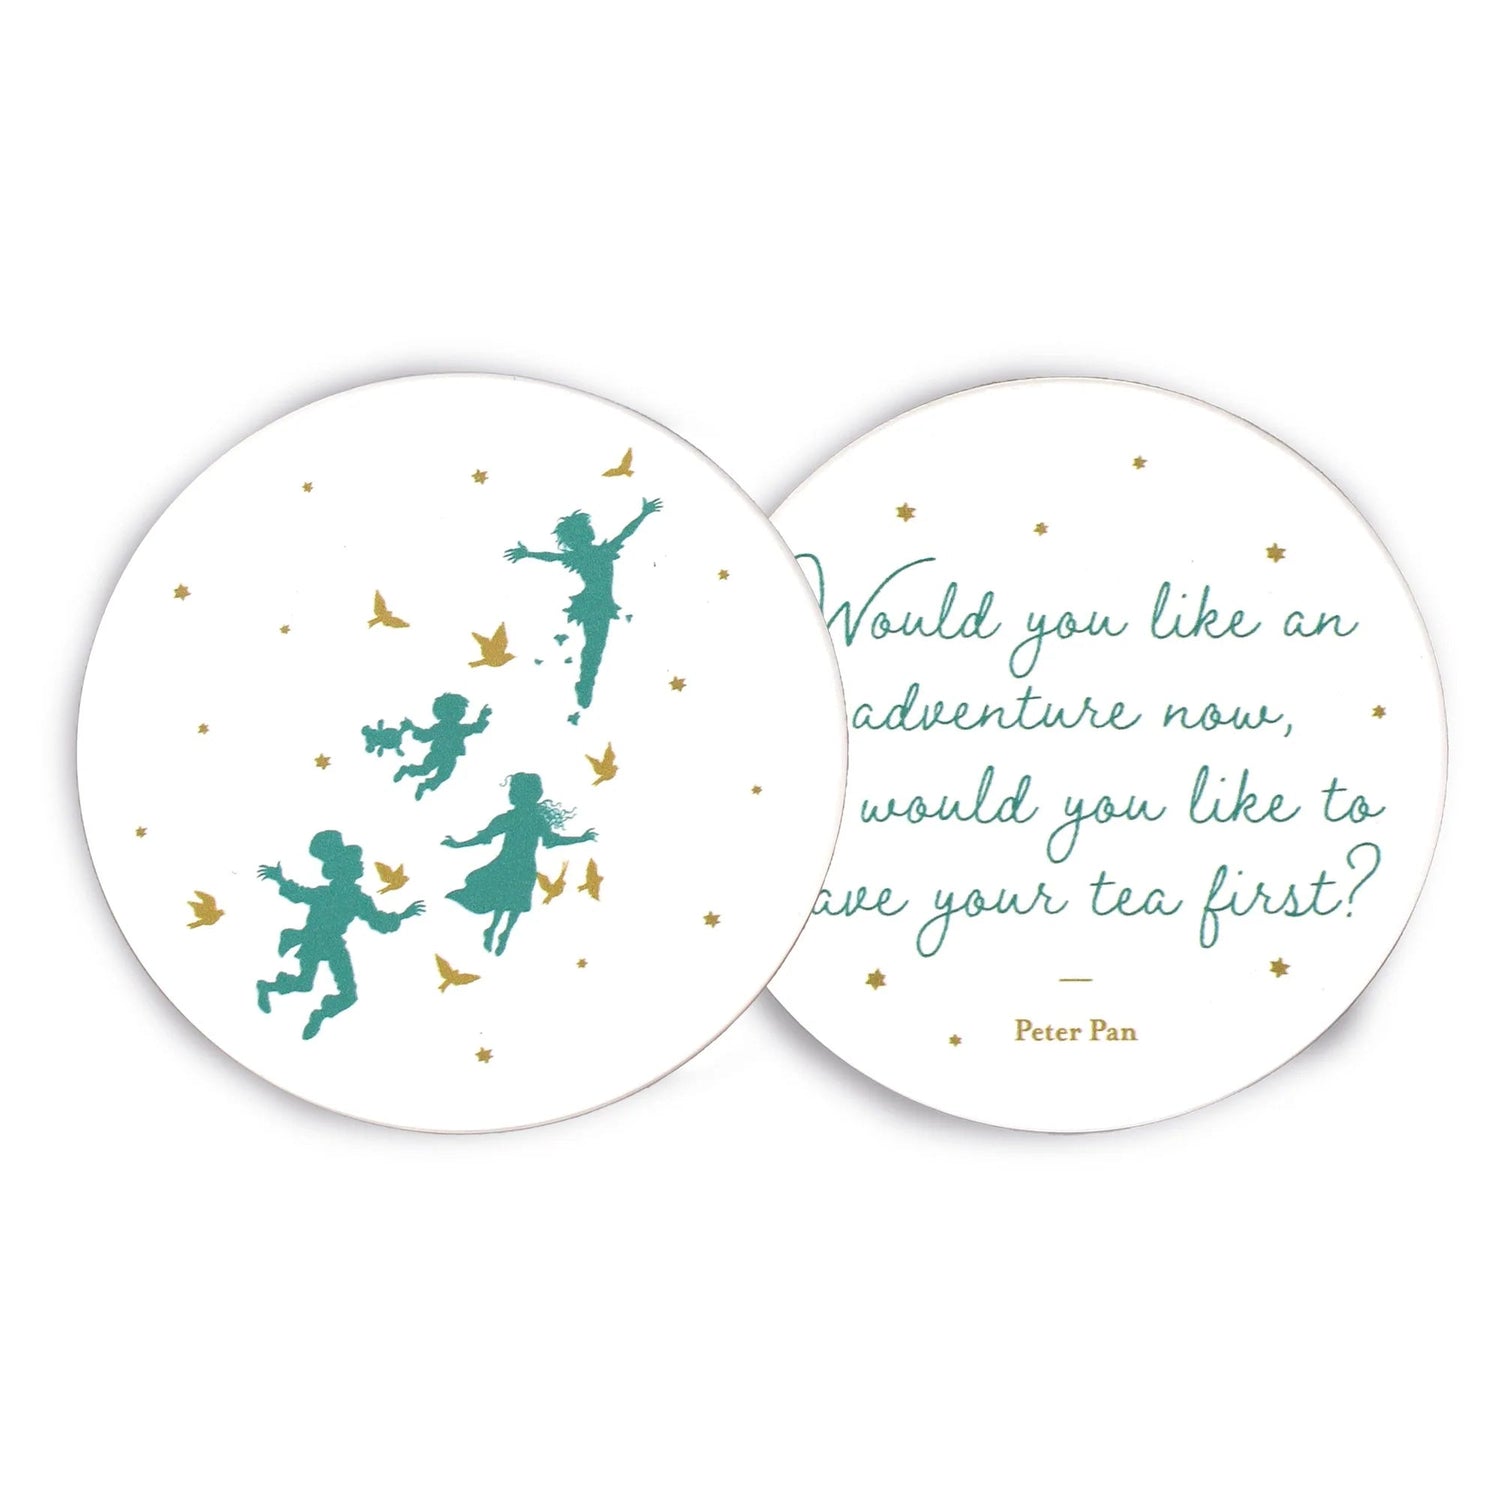 Shop Disney Neverland Set of 2 Ceramic Coasters - Premium Coasters from Half Moon Bay Online now at Spoiled Brat 